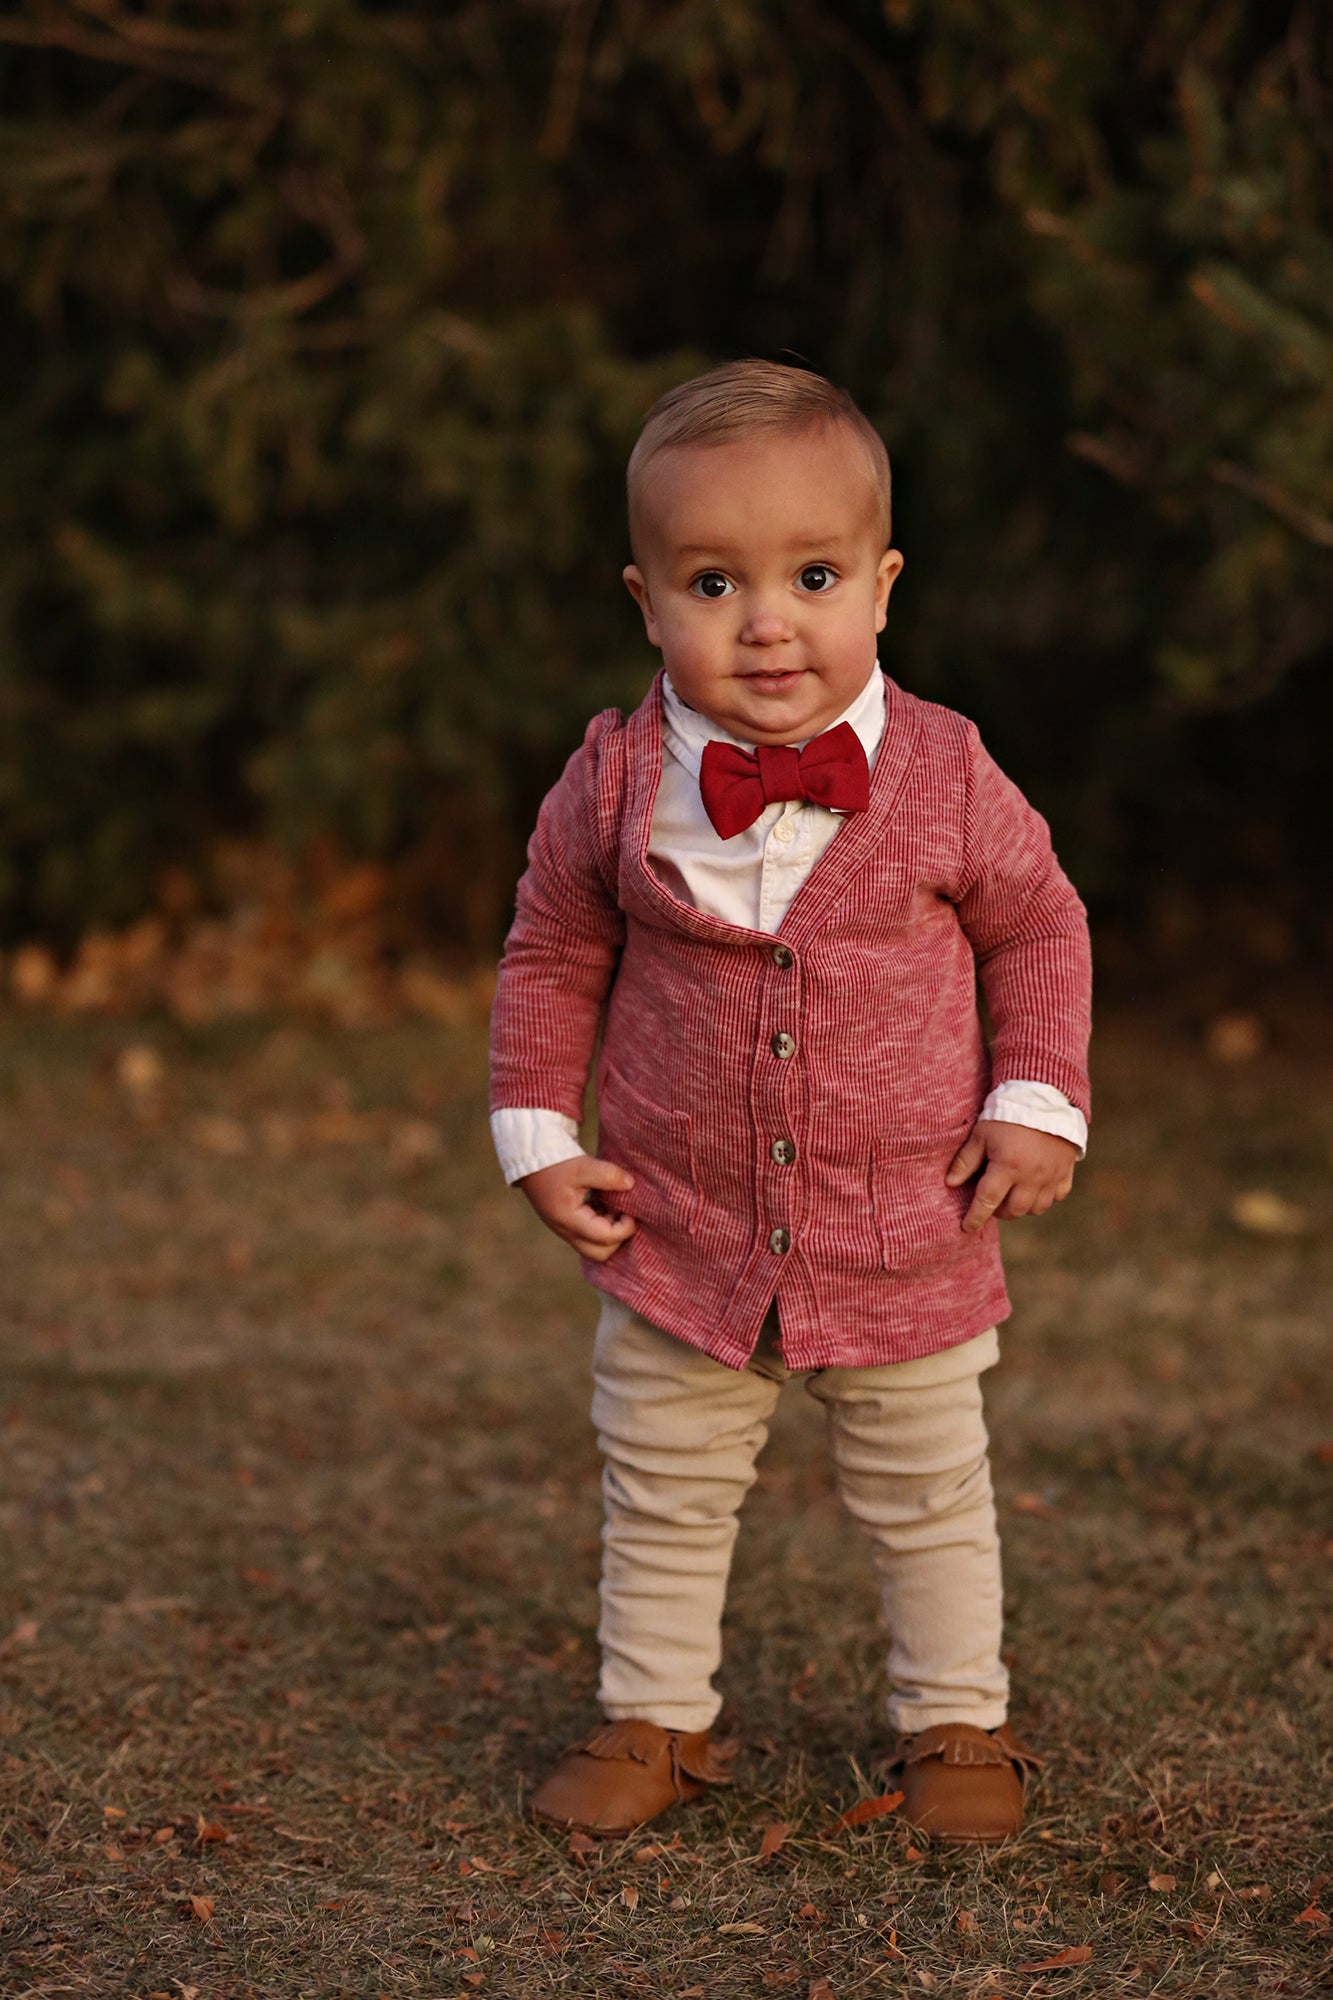 Ruby Bow Tie